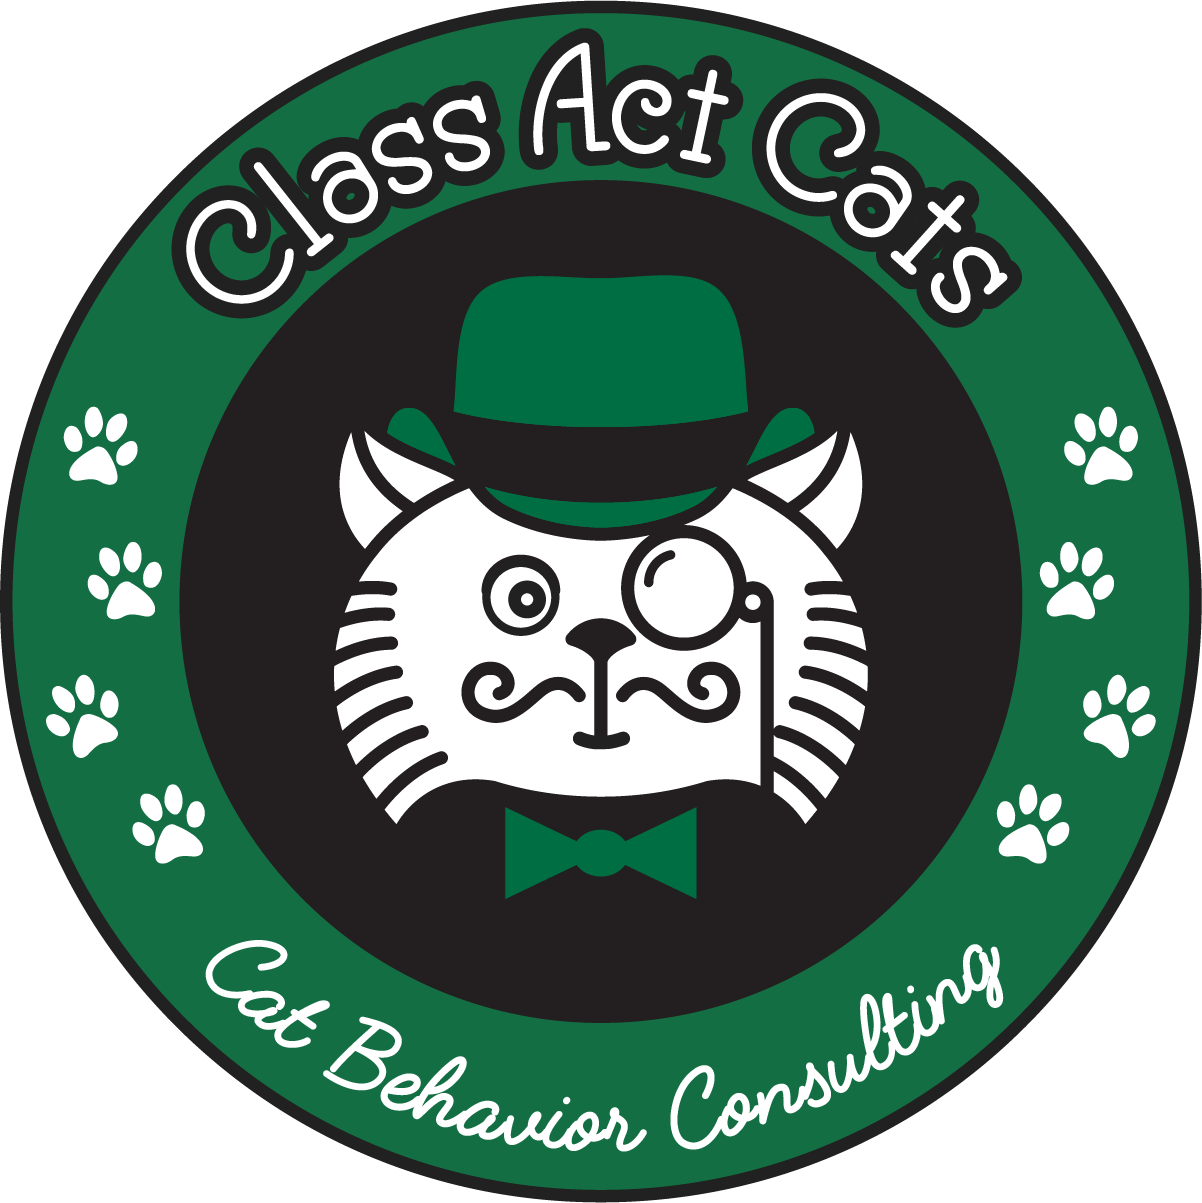 Class act cats logo. A green circle with "Class Act Cats Cat Behavior Consulting" surrounds a cat in a top hat